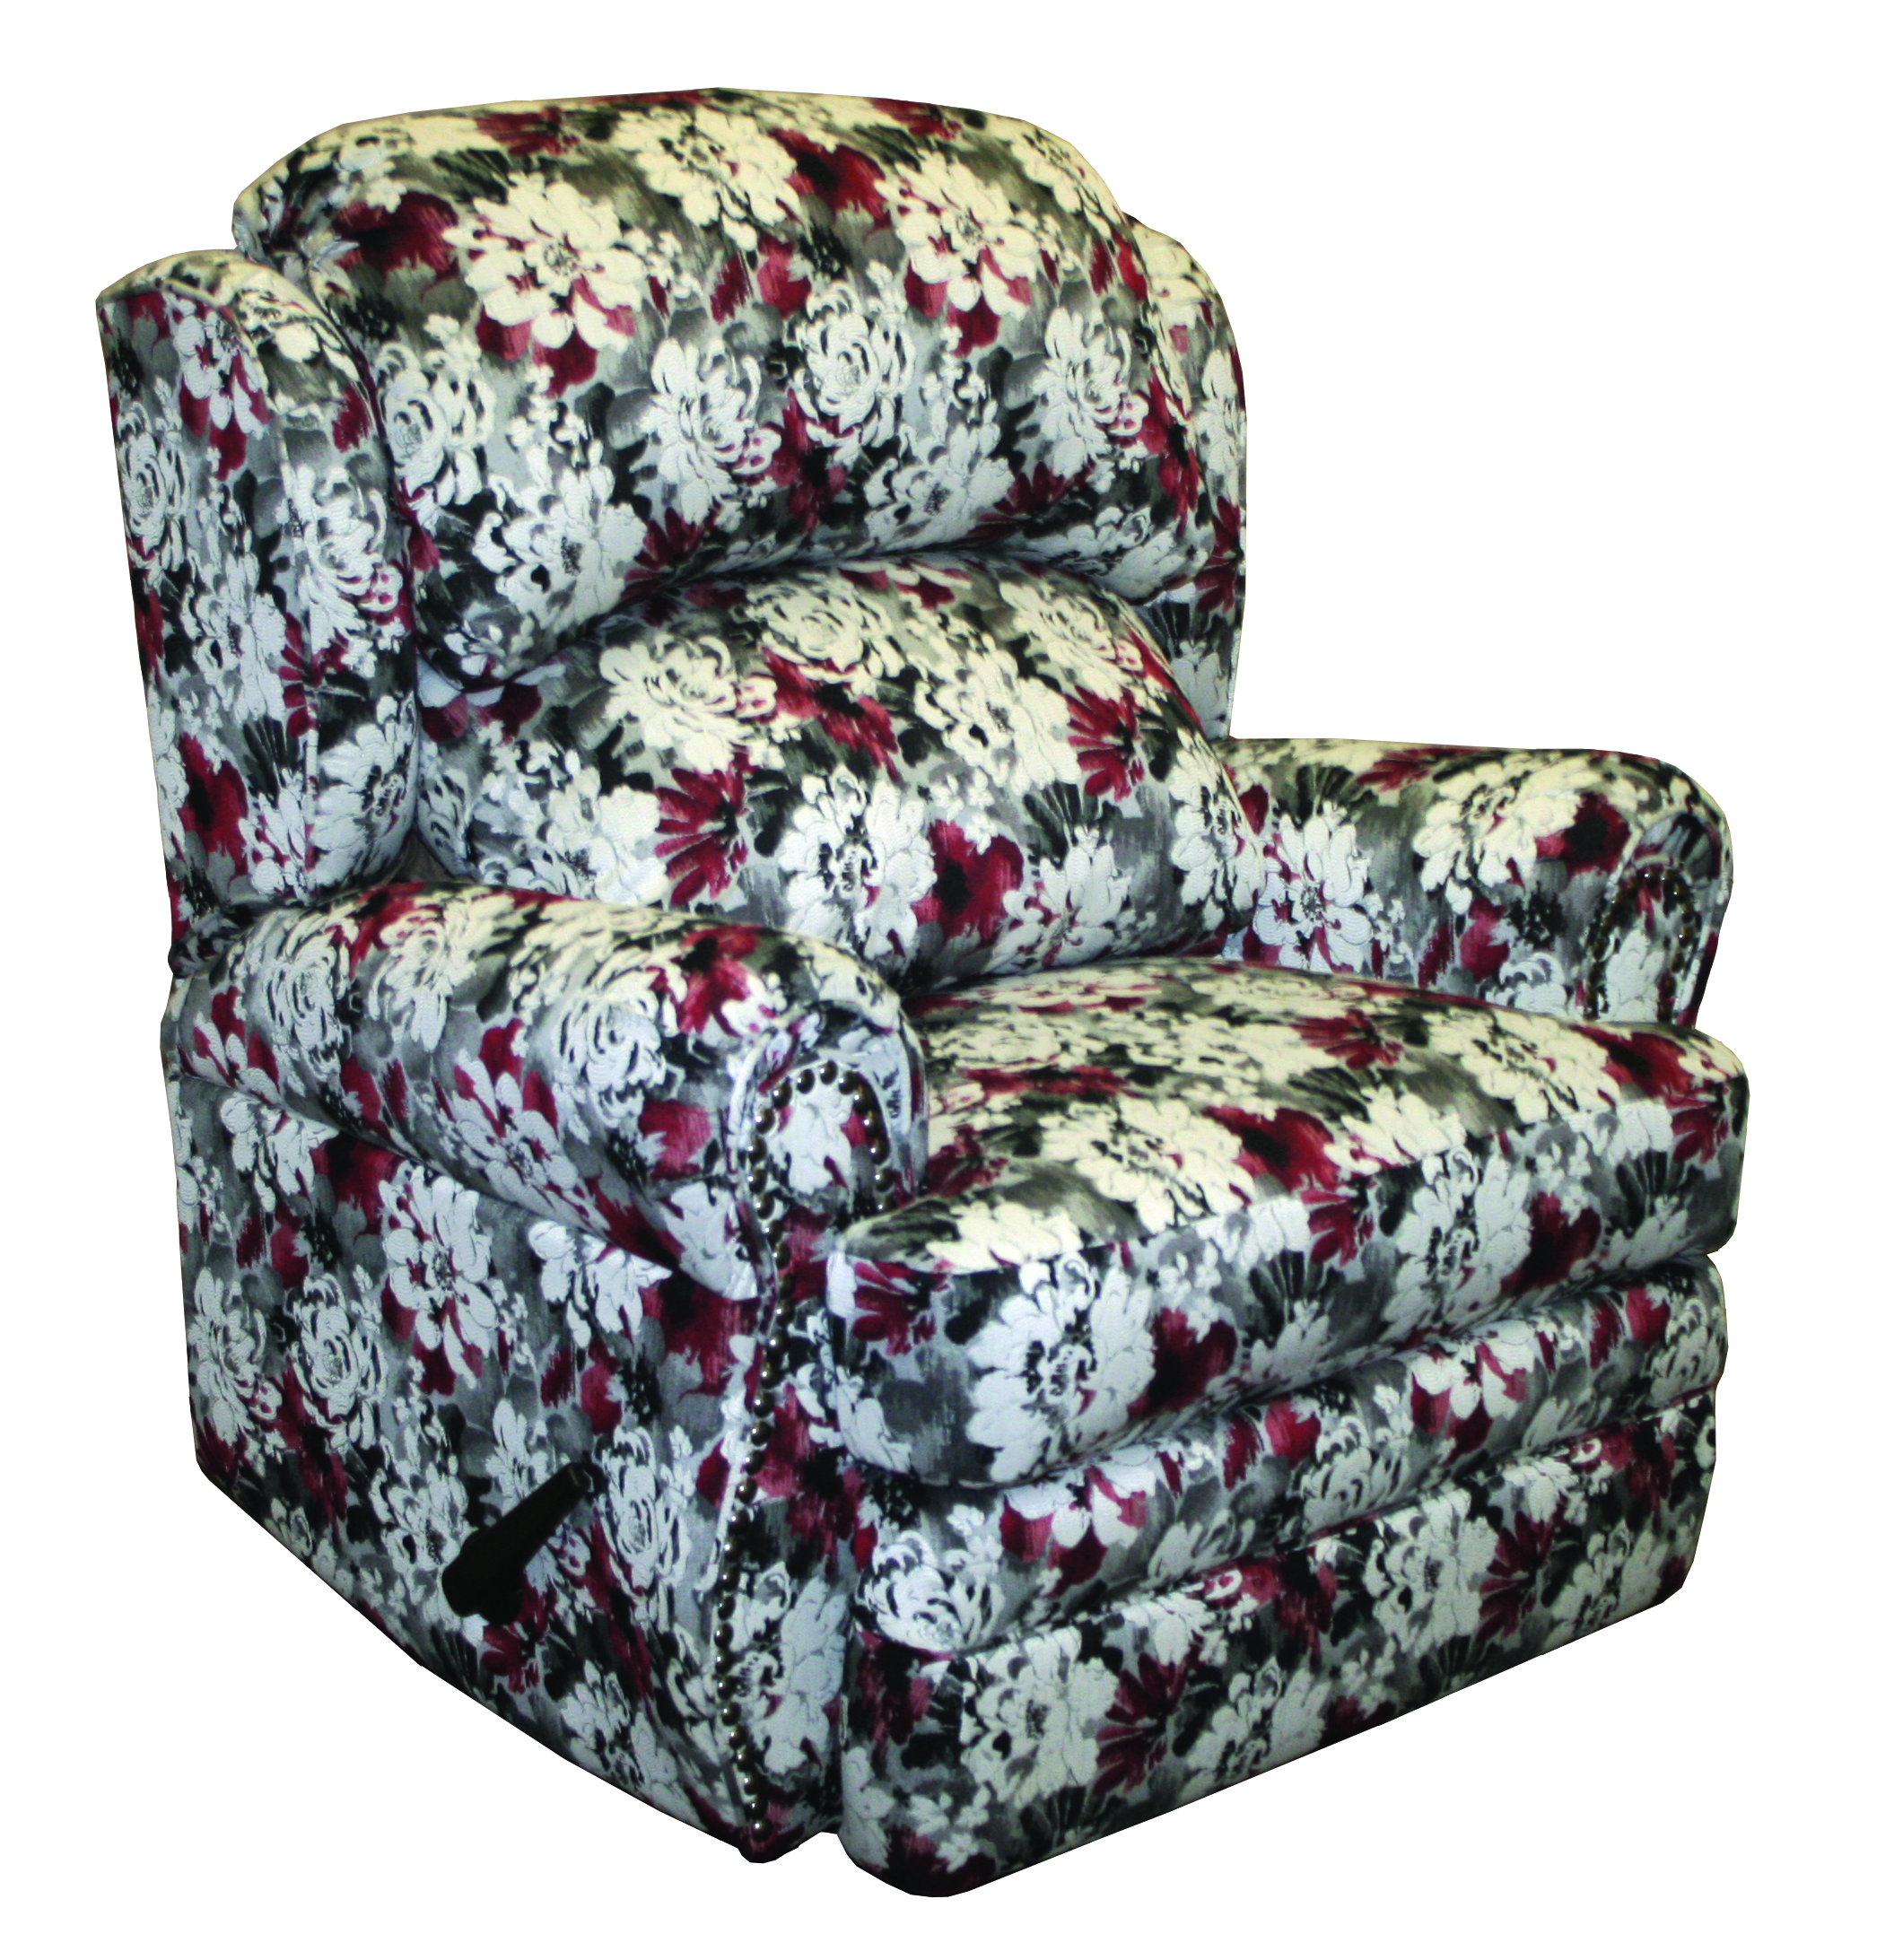 White and Red floral recliner